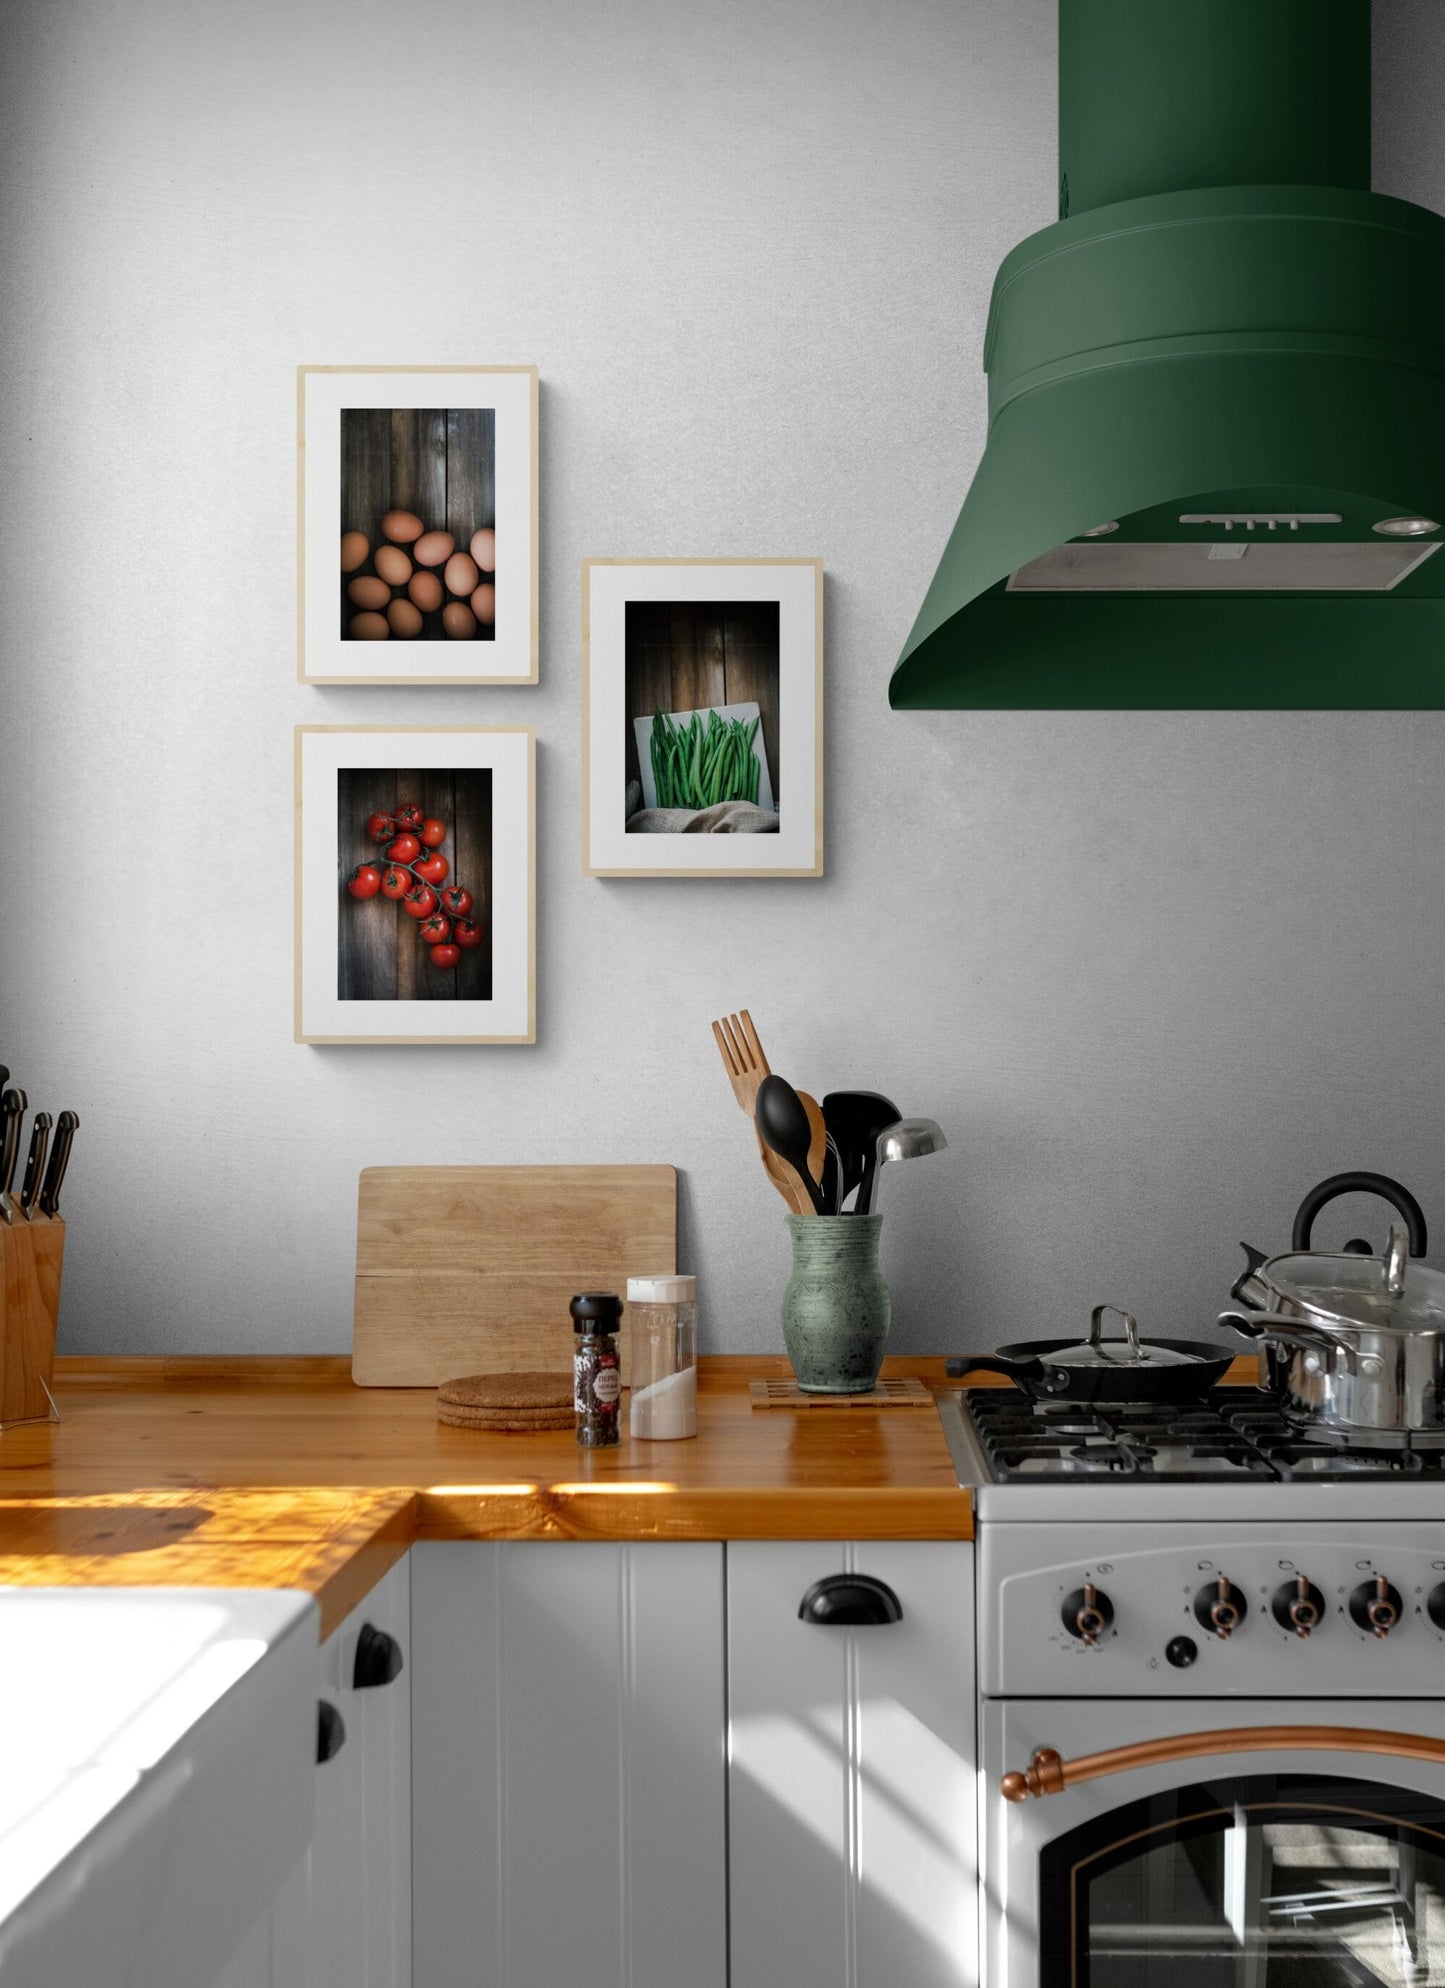 Three food photographs as wall prints in a rustic kitchen